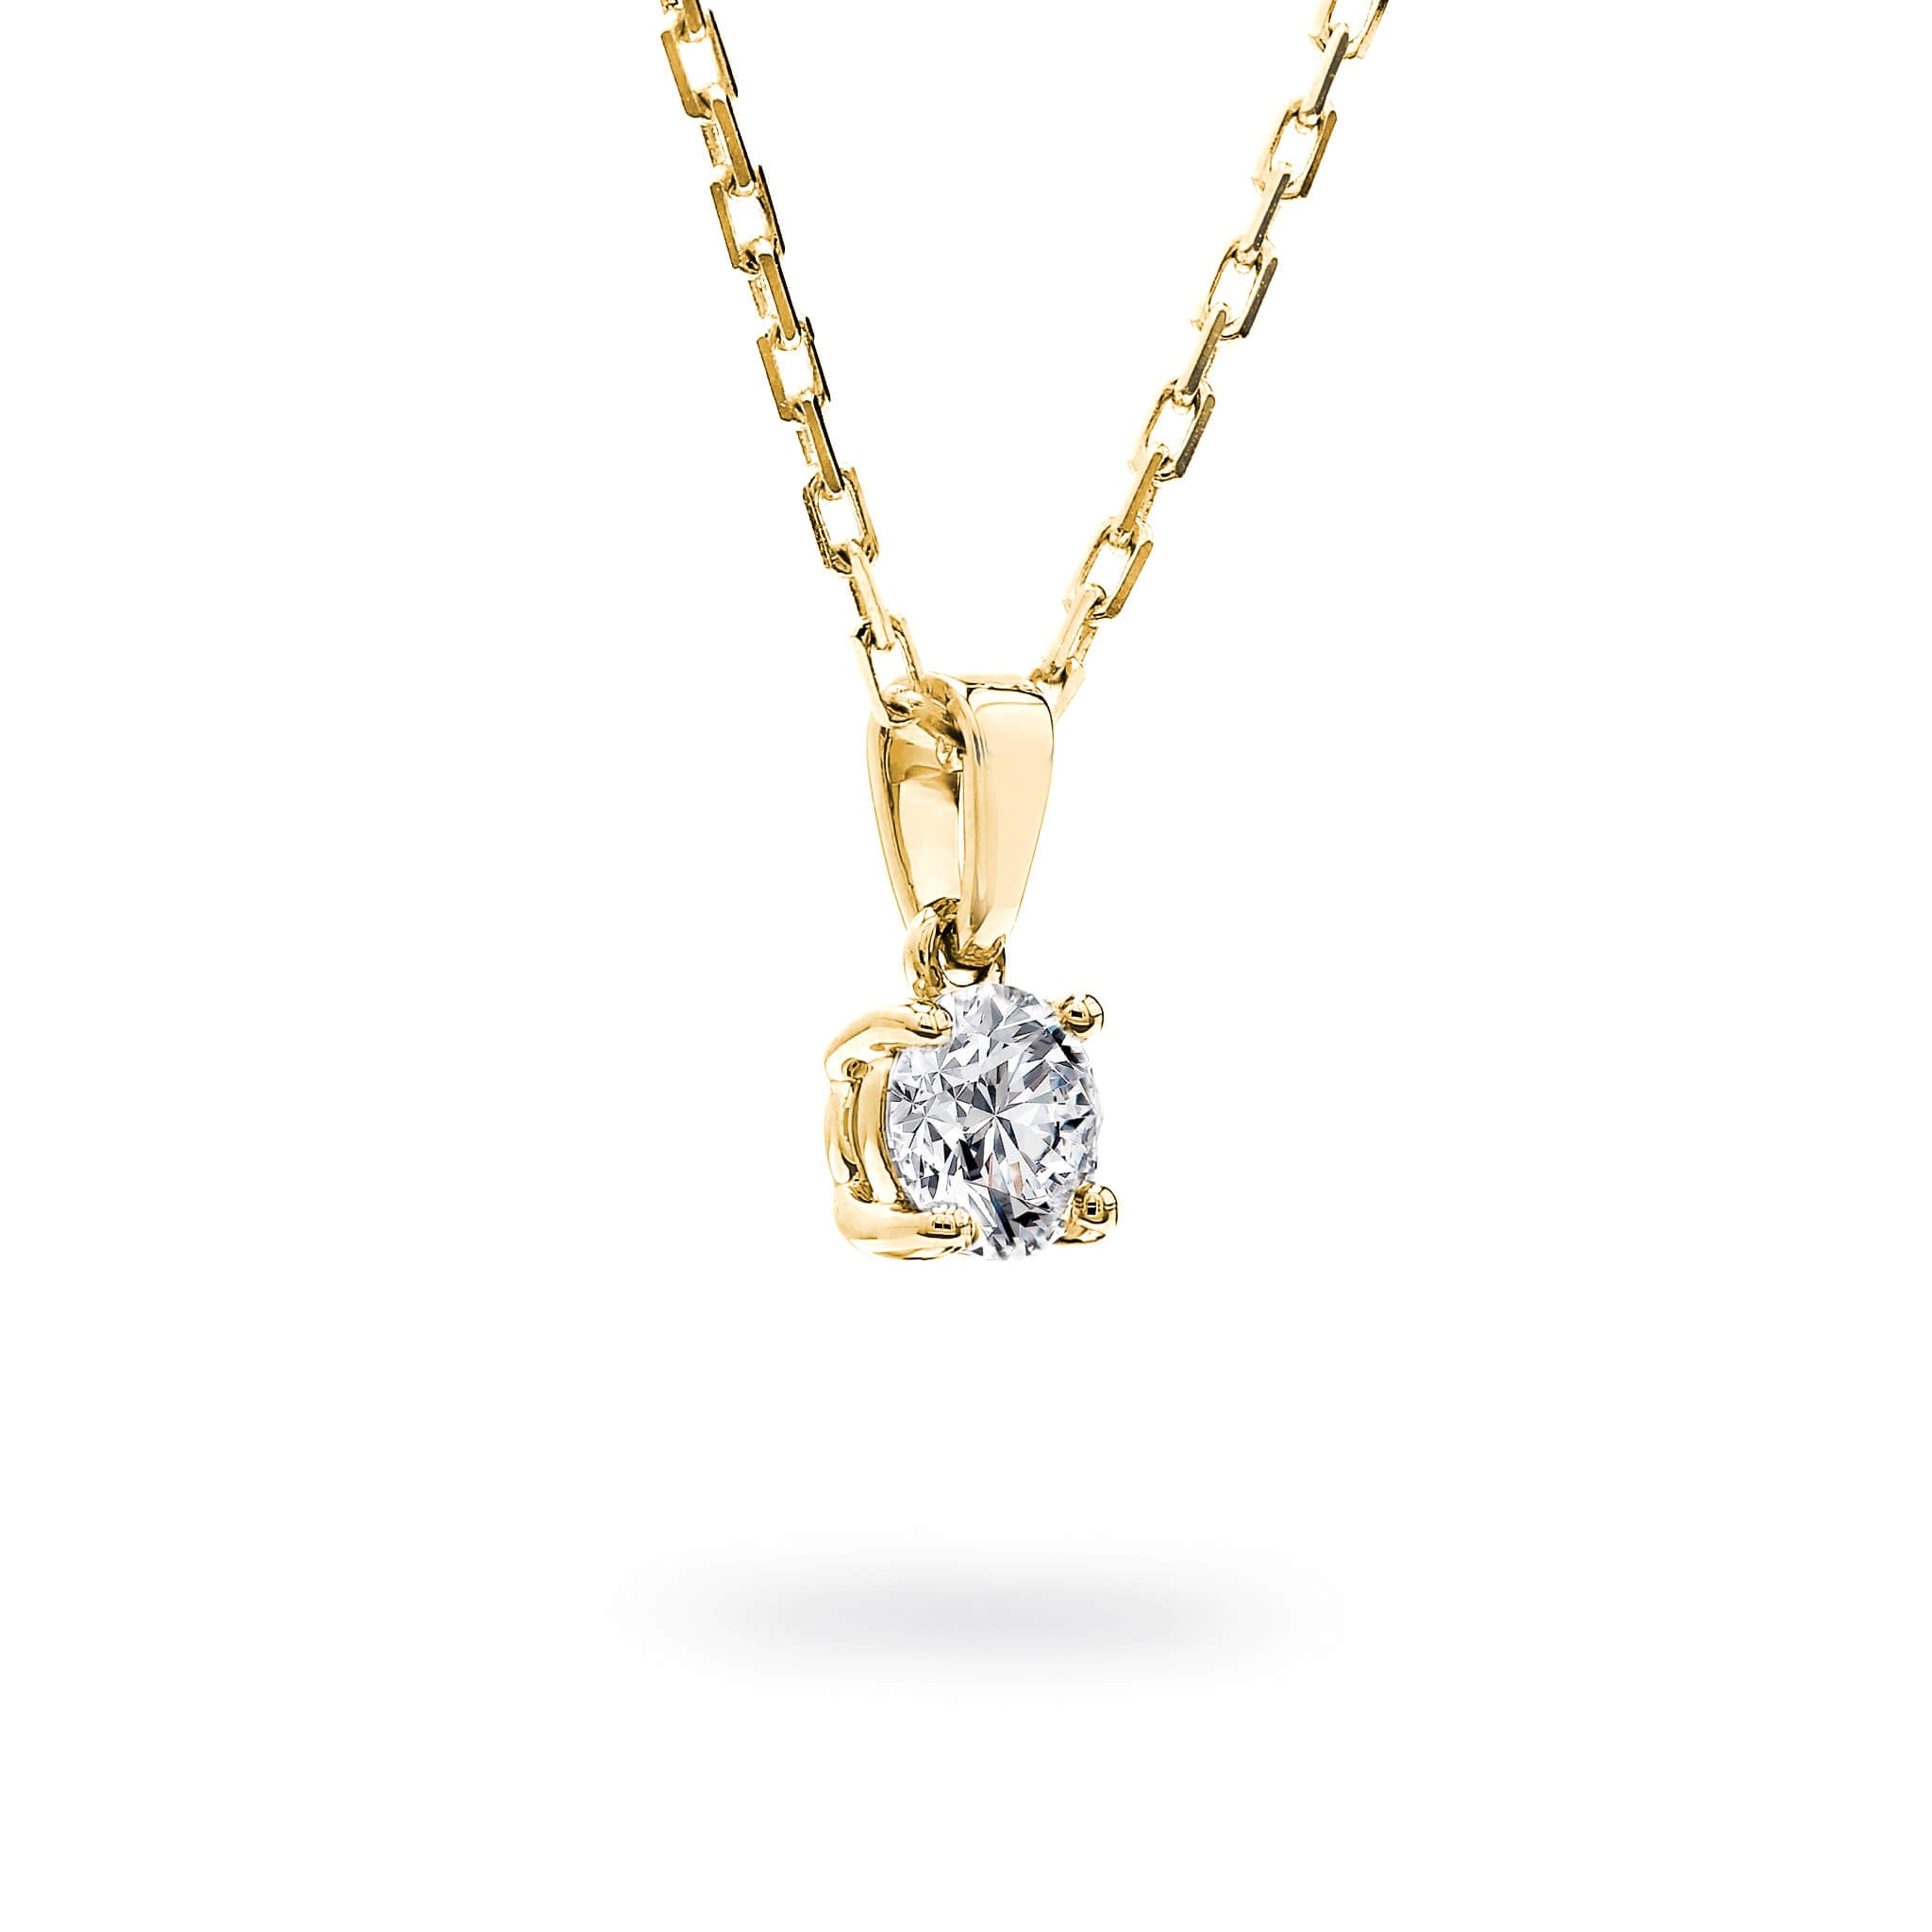 Shimansky - 4 Claw Solitaire Diamond Pendant 0.40ct crafted in 18K Yellow Gold